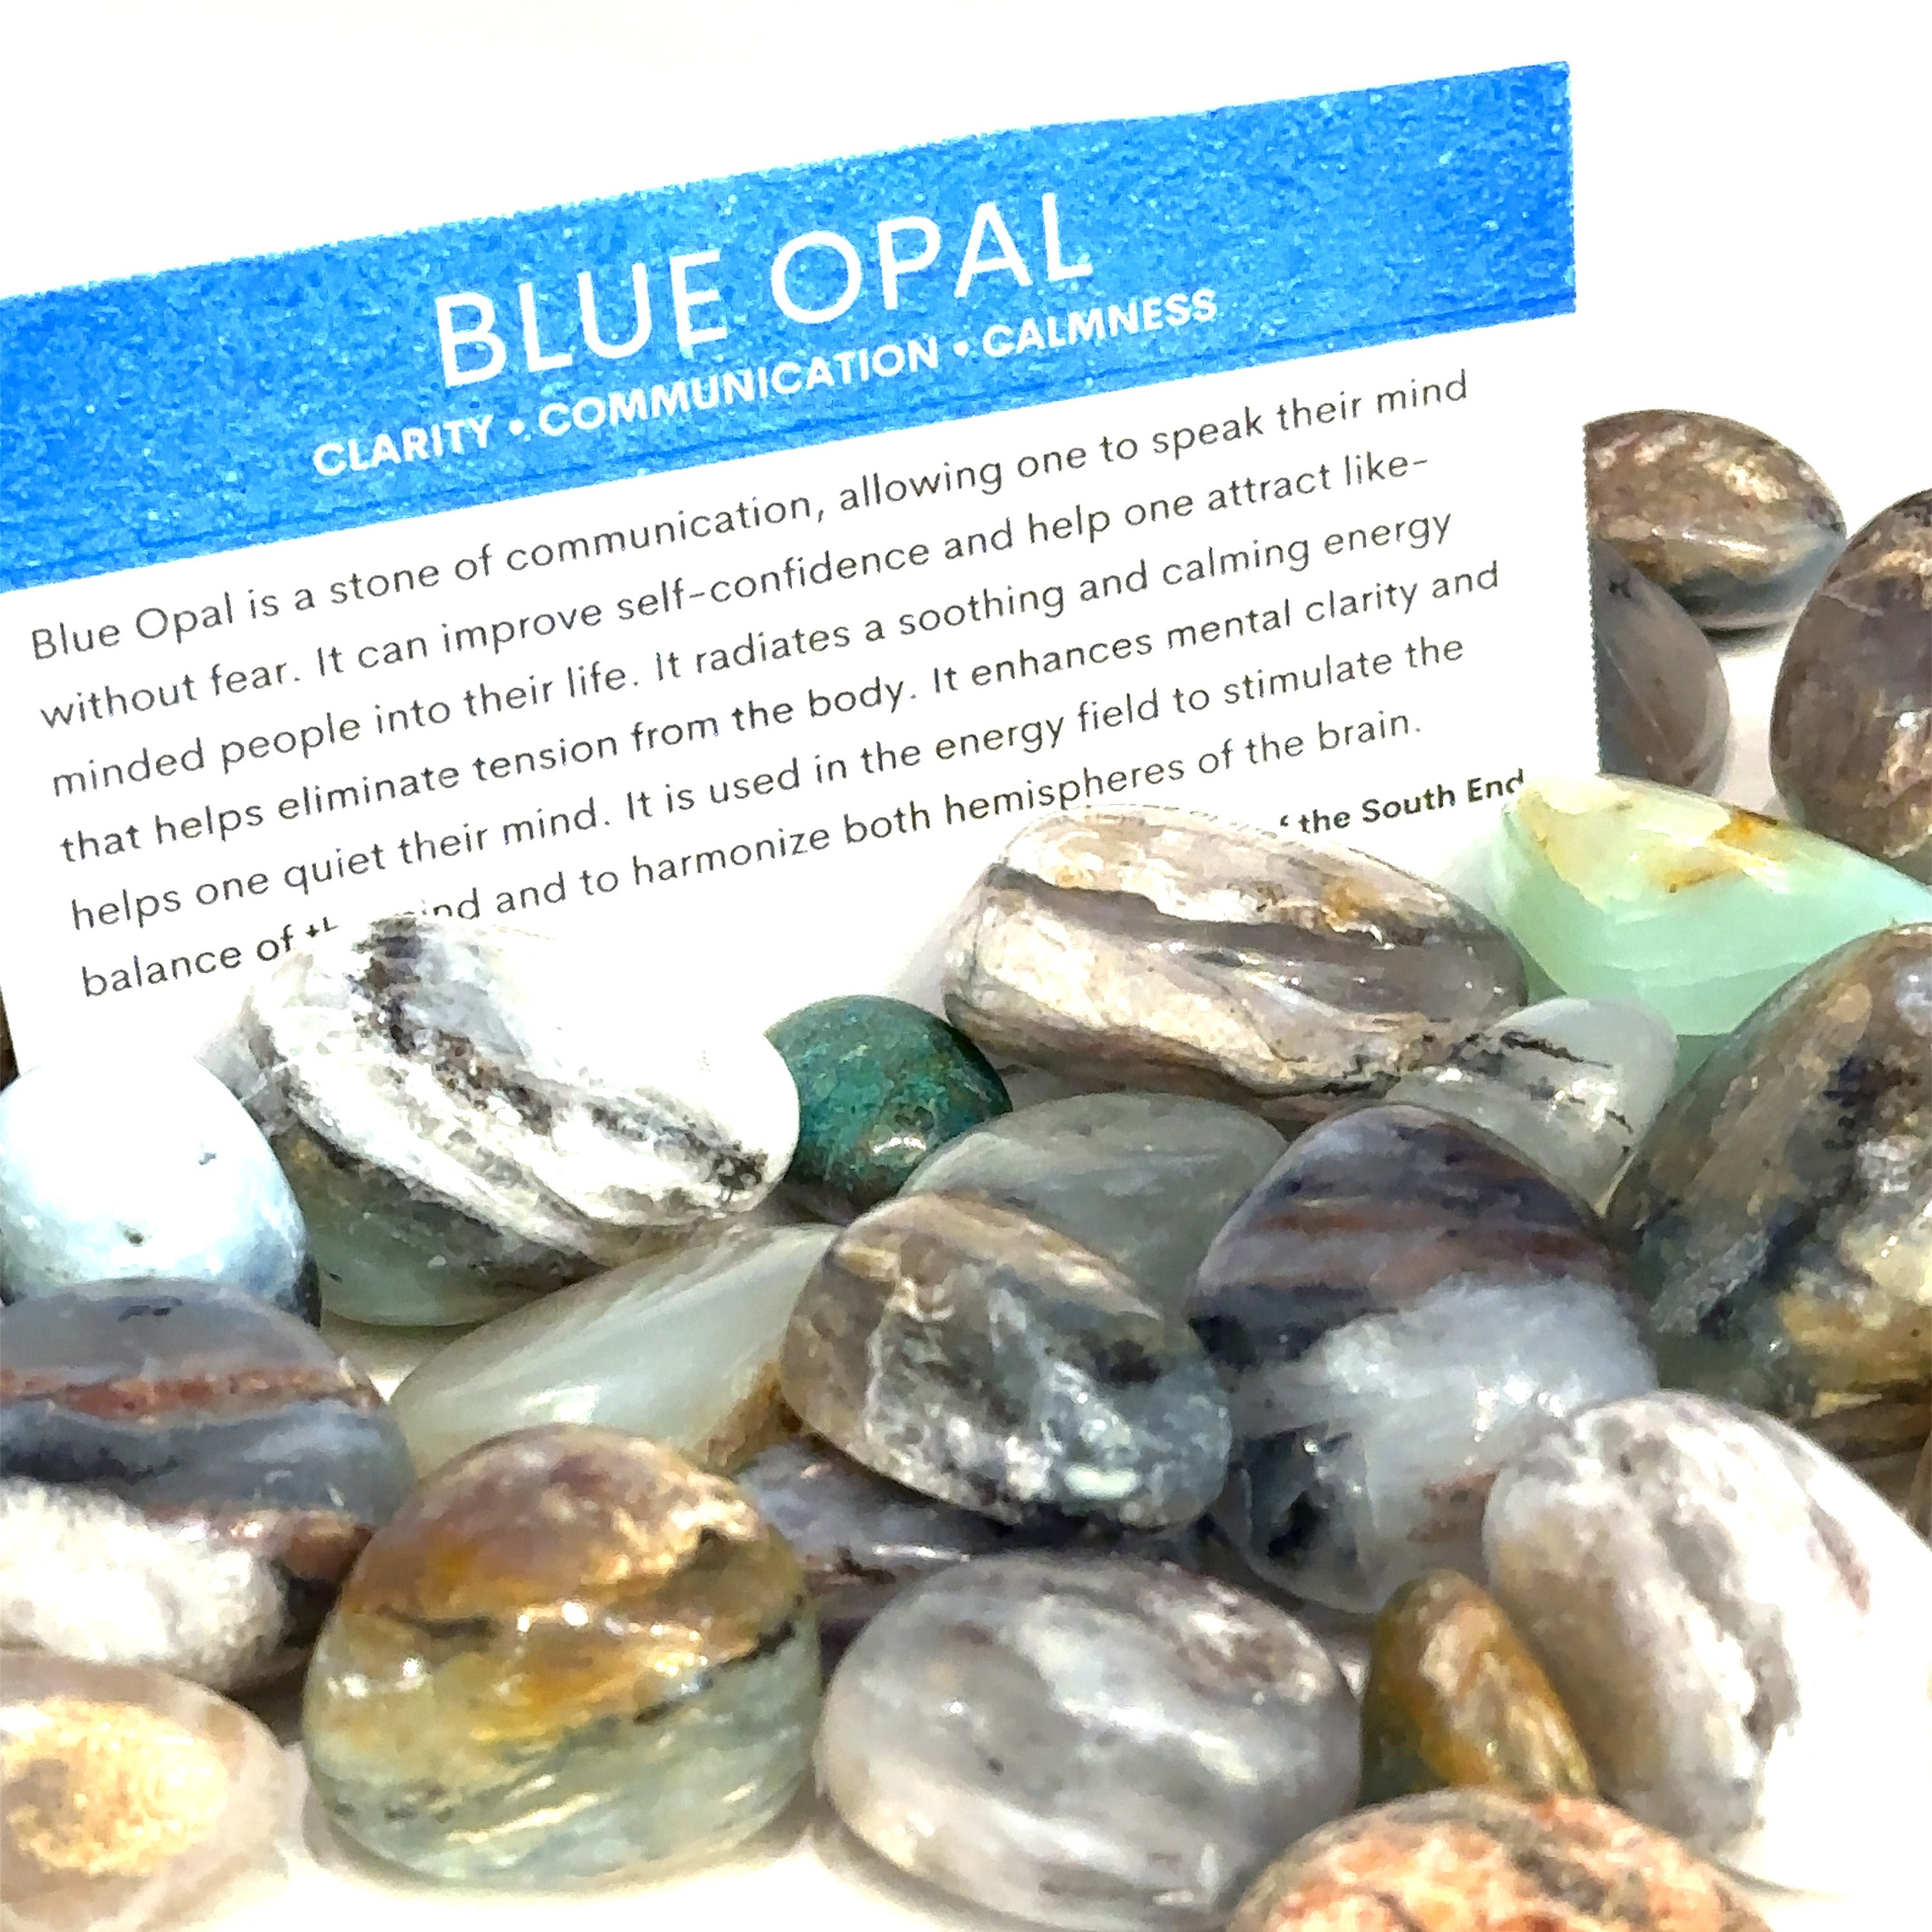 Is An Opal the Right Gemstone for You? - Opal Minded